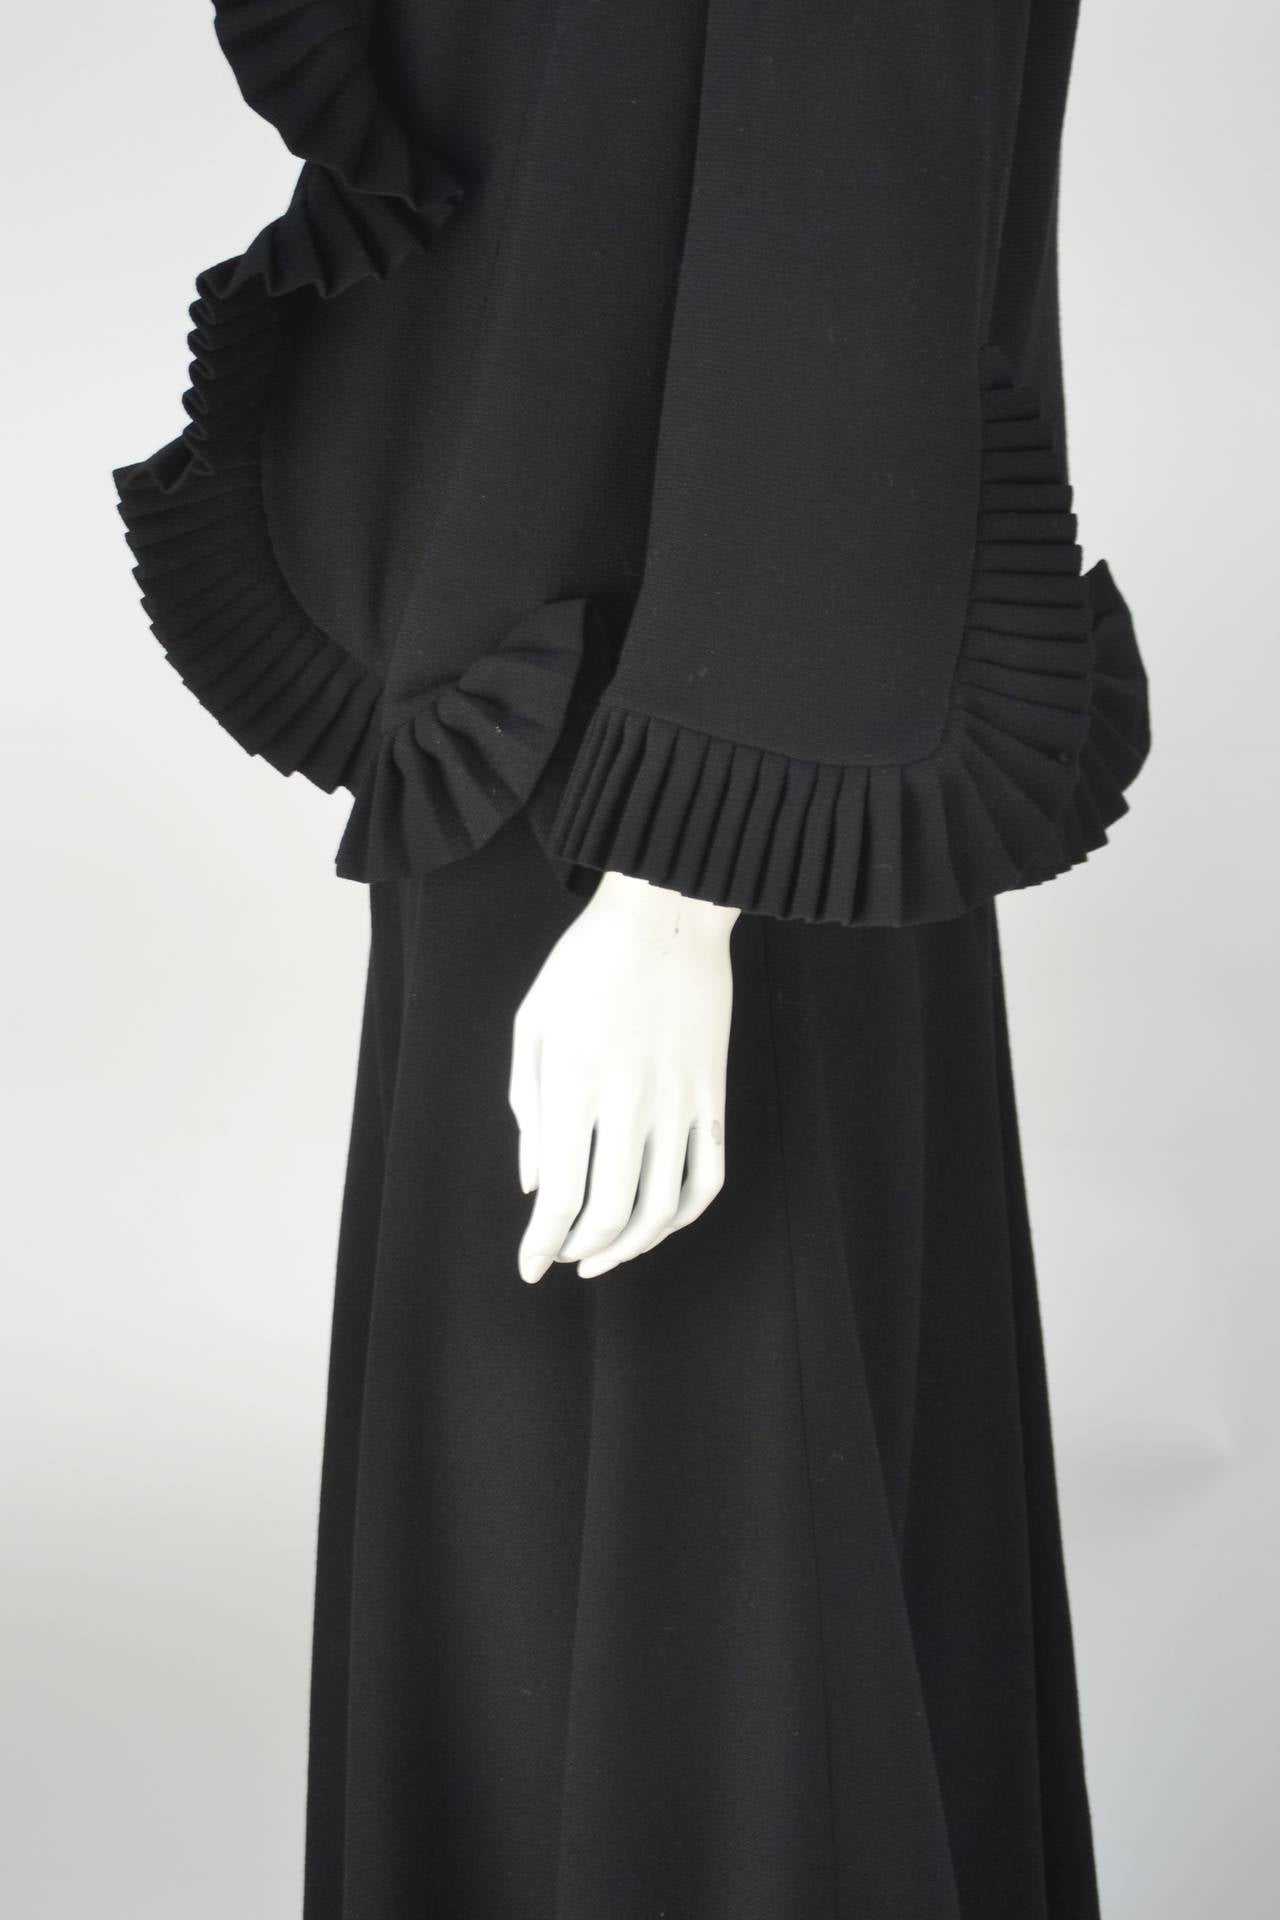 1960s House of Cardinali Black Wool Backless Gown with Bolero For Sale 3